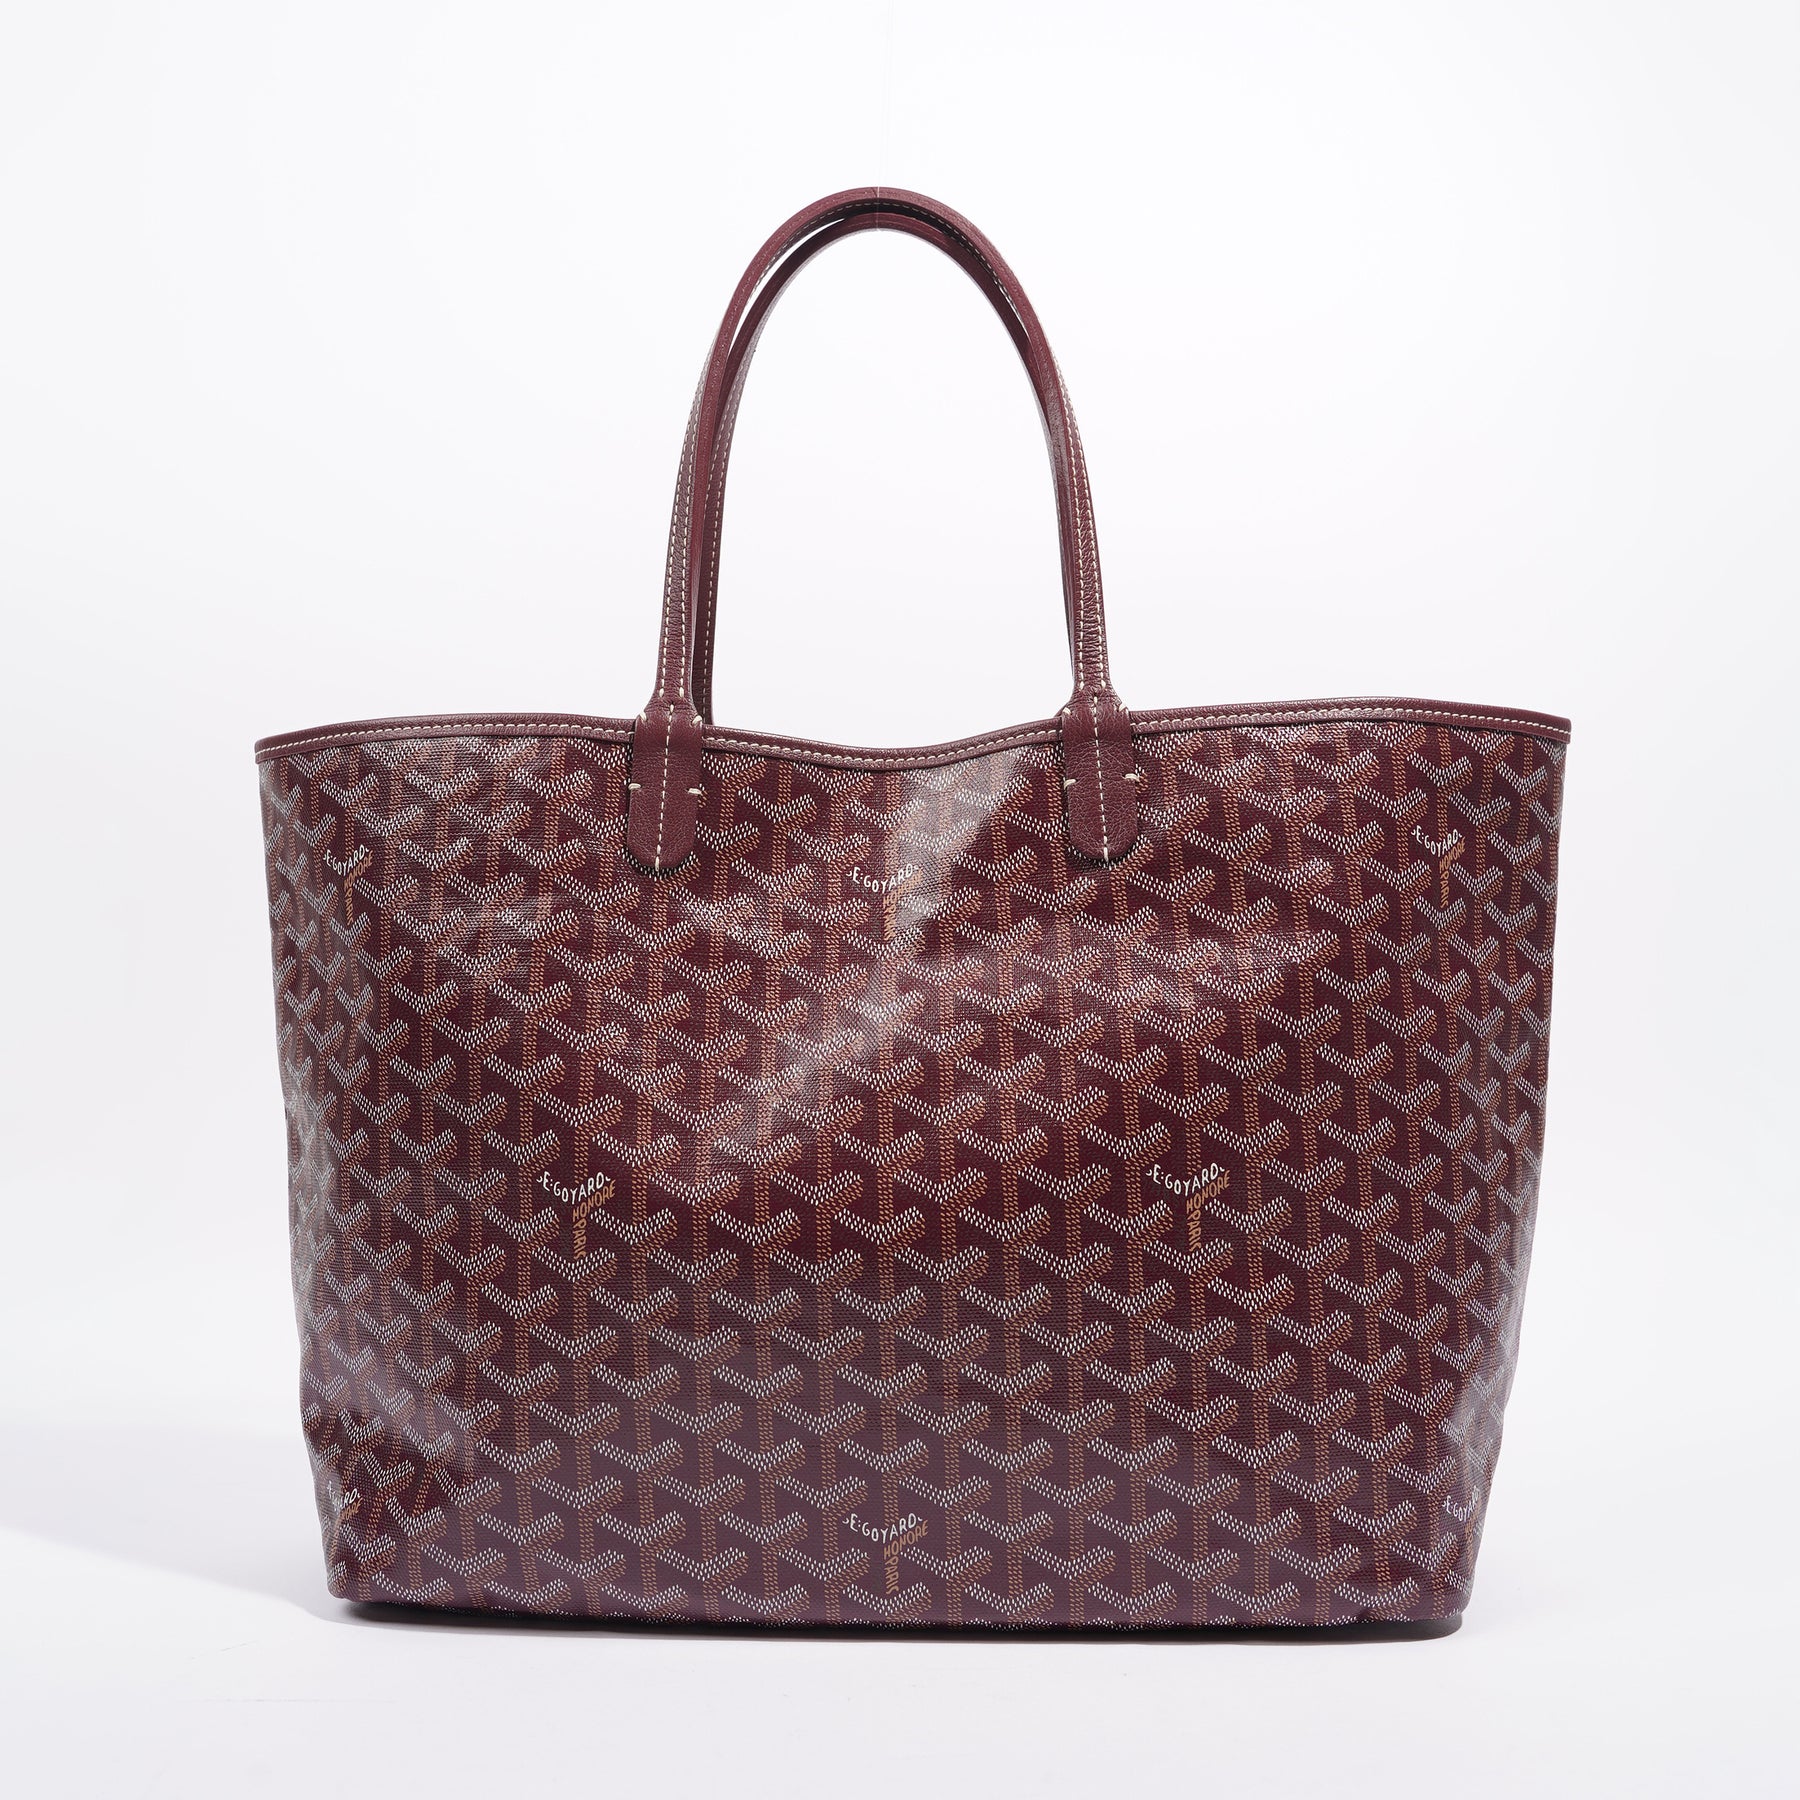 Musings of a Goyard Enthusiast: At Auction: GOYARD Belvedere GM in Red